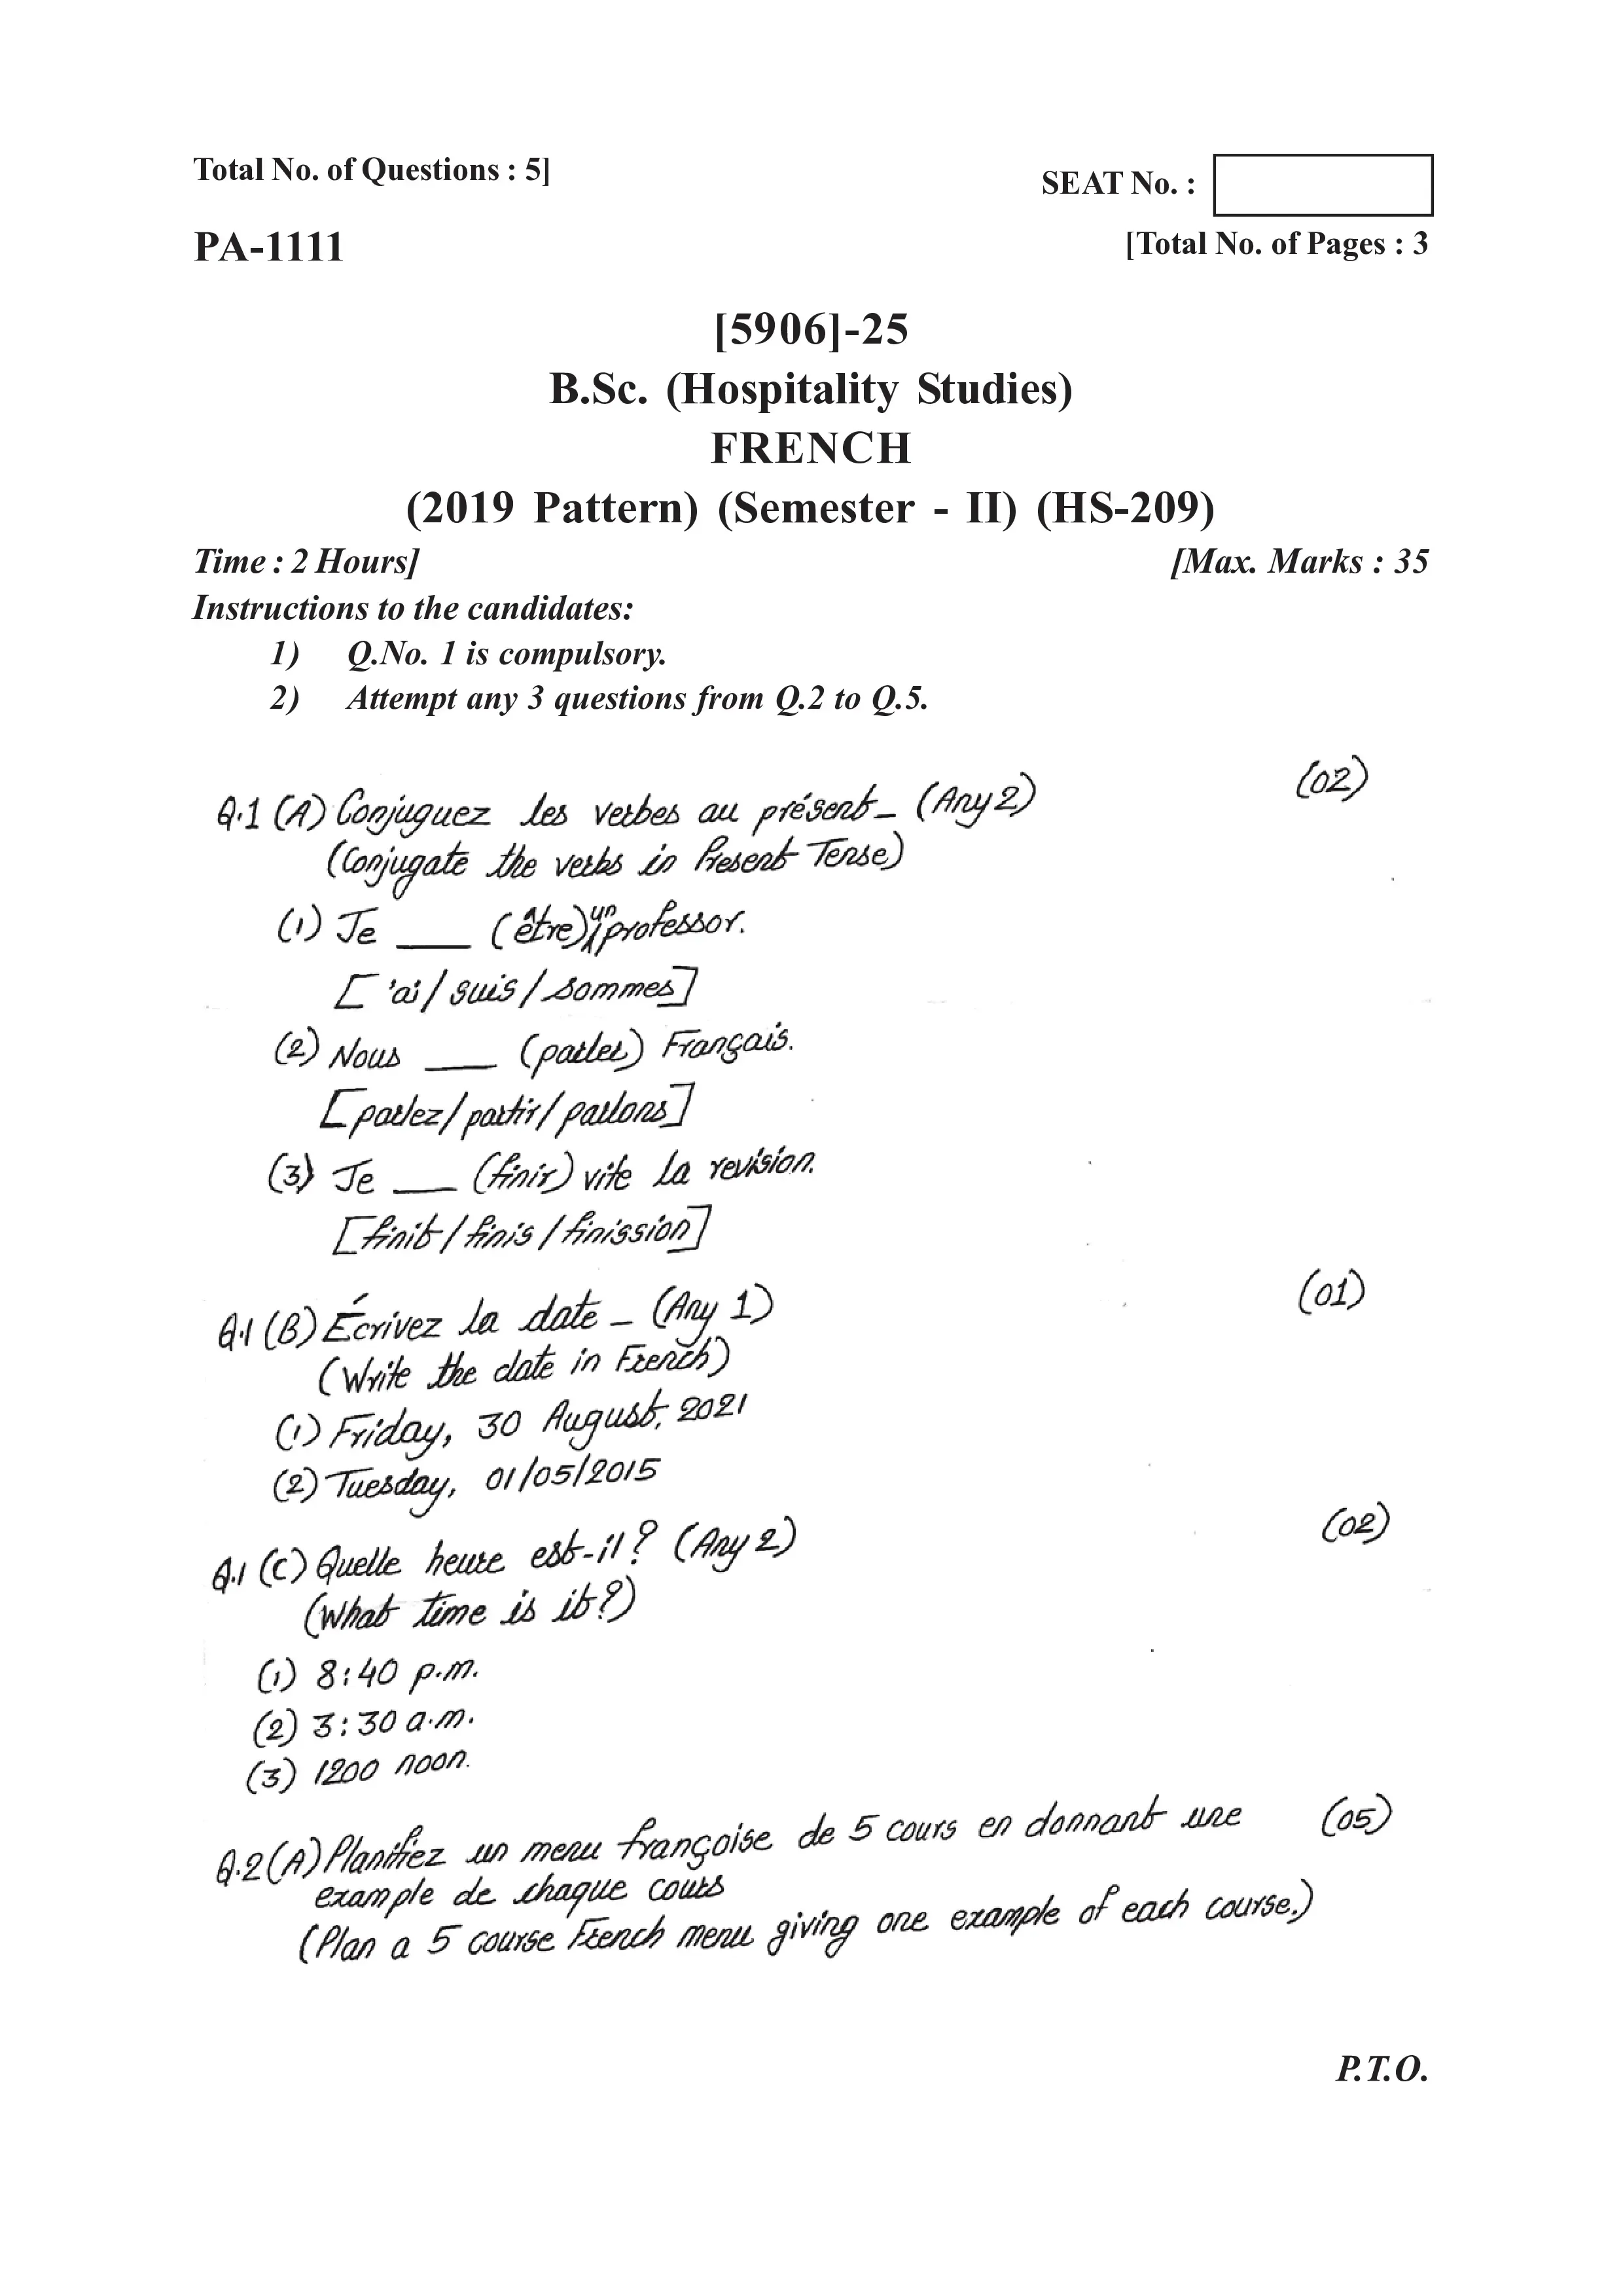 BSC(HS) FRENCH Question Paper (2019 Pattern) (Semester - II)